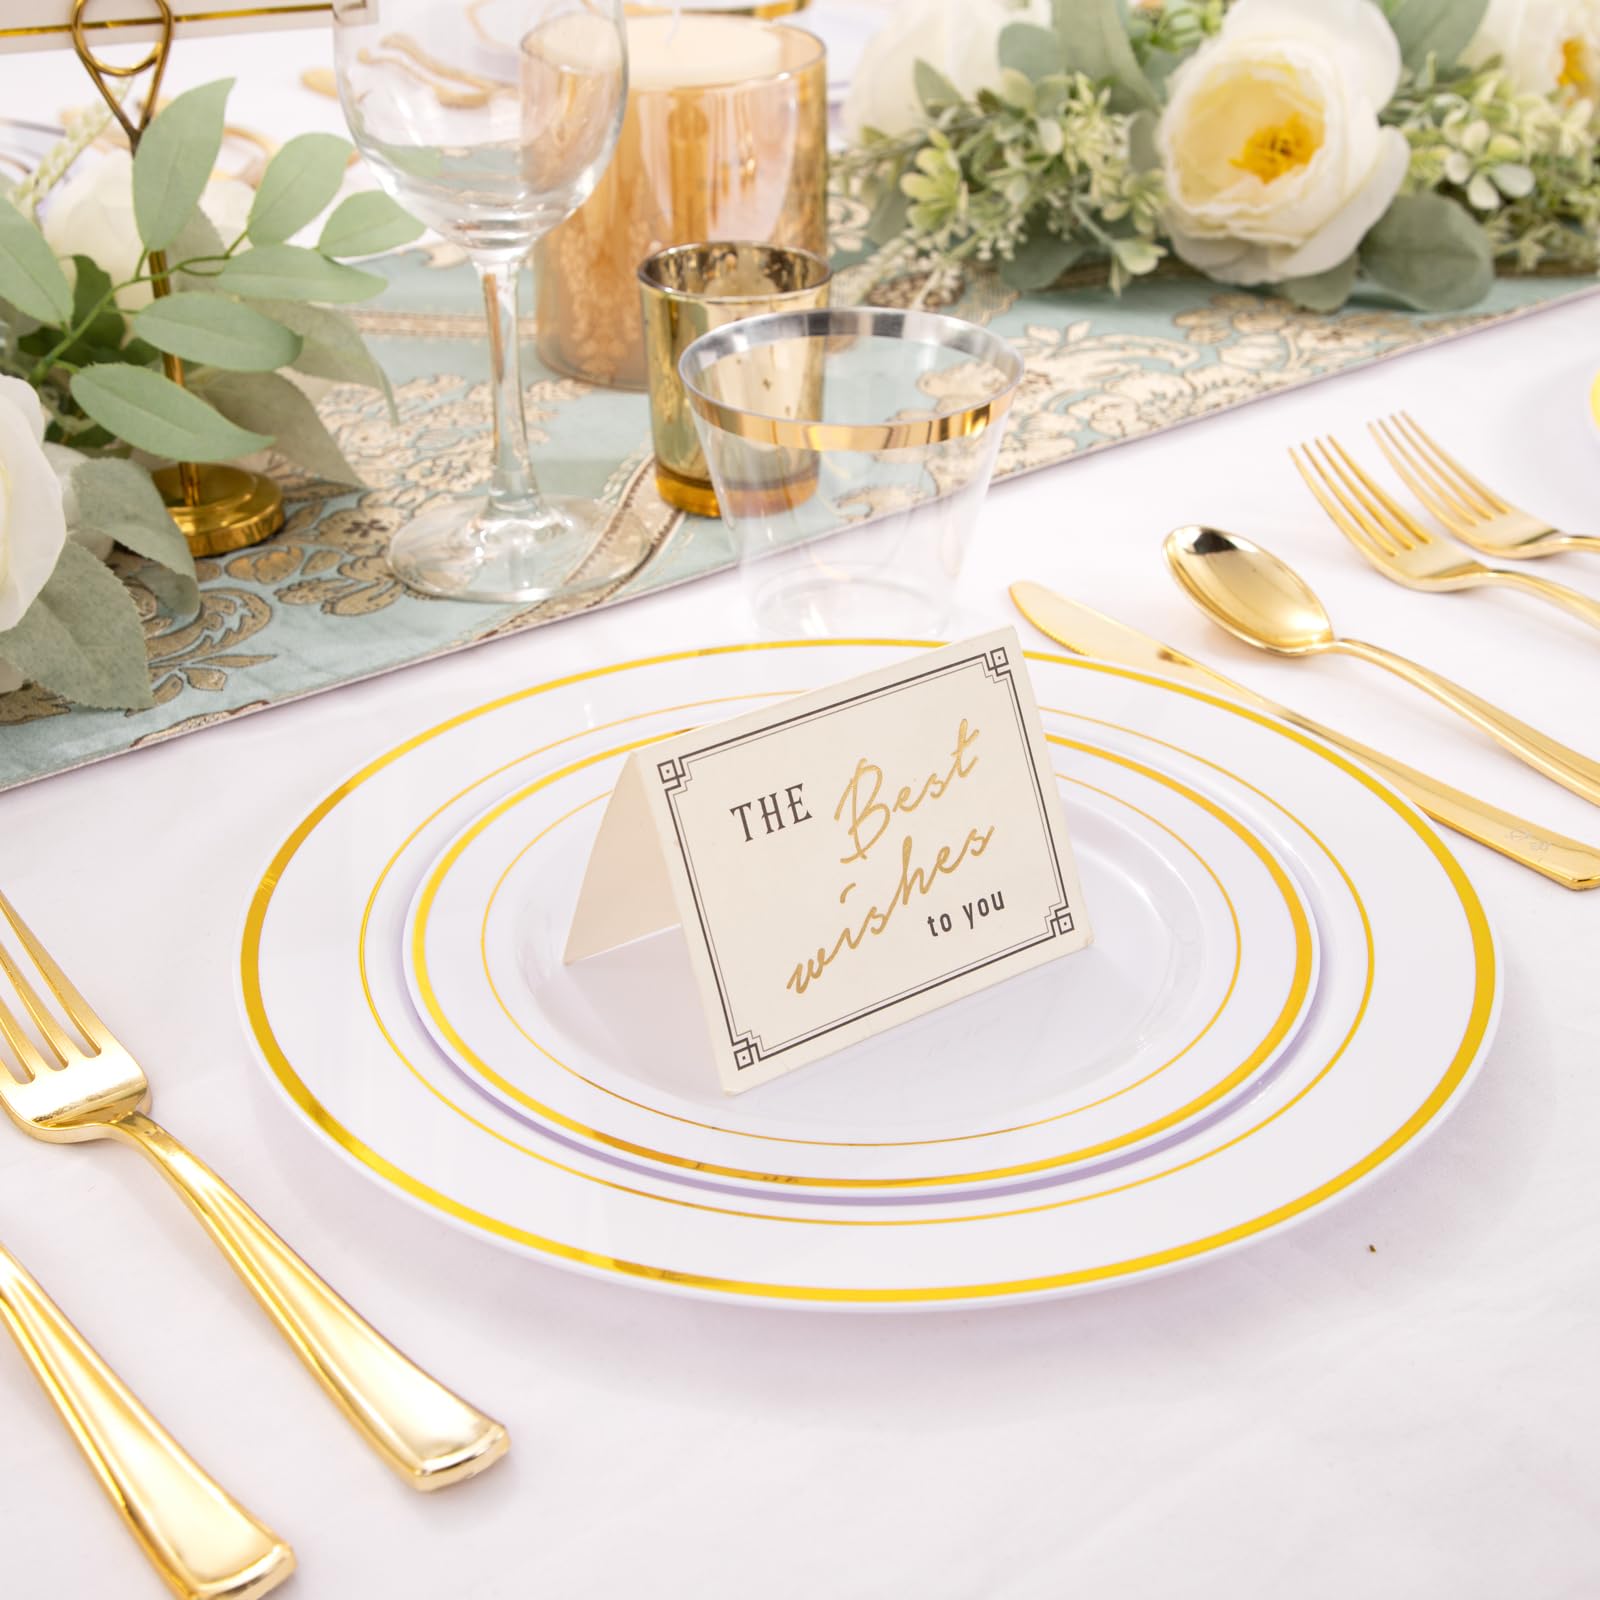 WELLIFE 350 Pieces Gold Plastic Plates with Disposable Silverware and Cups, Include: 50 Dinner Plates 10.25”, 50 Dessert Plates 7.5”, 50 Gold Rim Cups 9 OZ, 50 Gold Cutlery